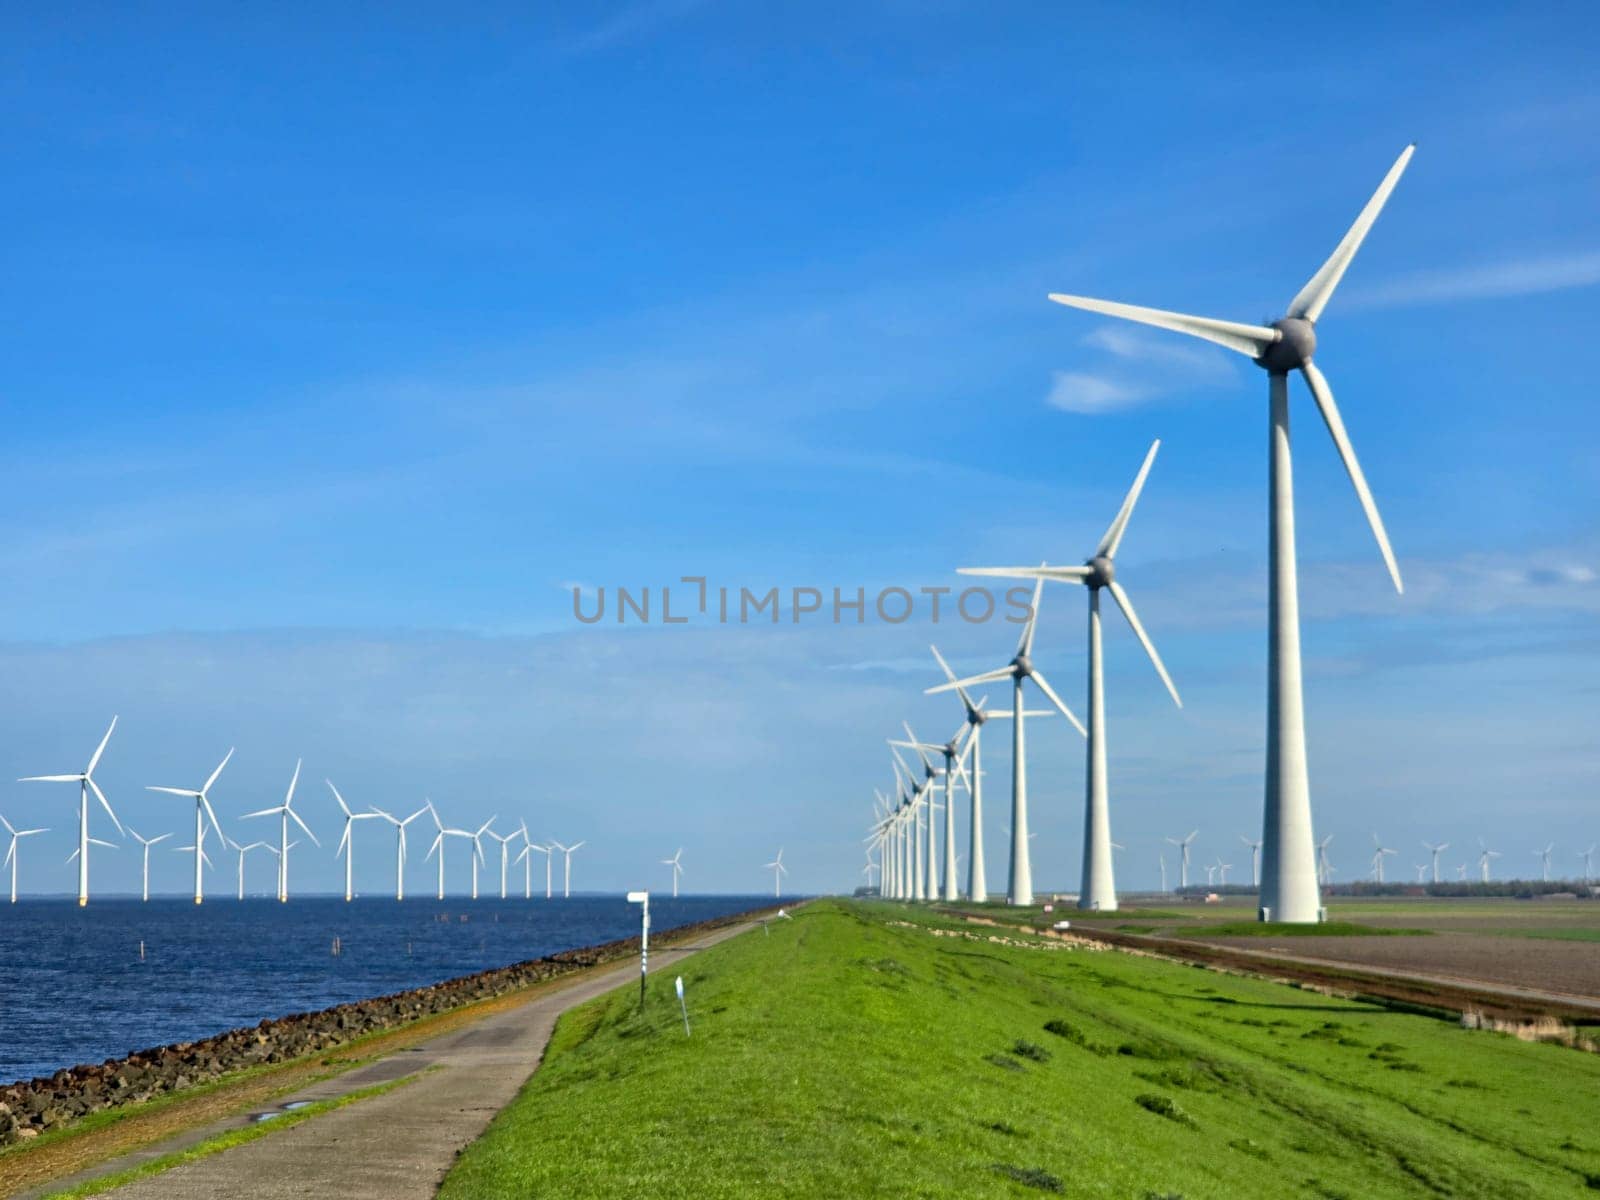 windmill turbines on a Dutch dike generating green energy electrically, windmills isolated at sea in the Netherlands. Energy transition, zero emissions, carbon neutral, Earth day concept